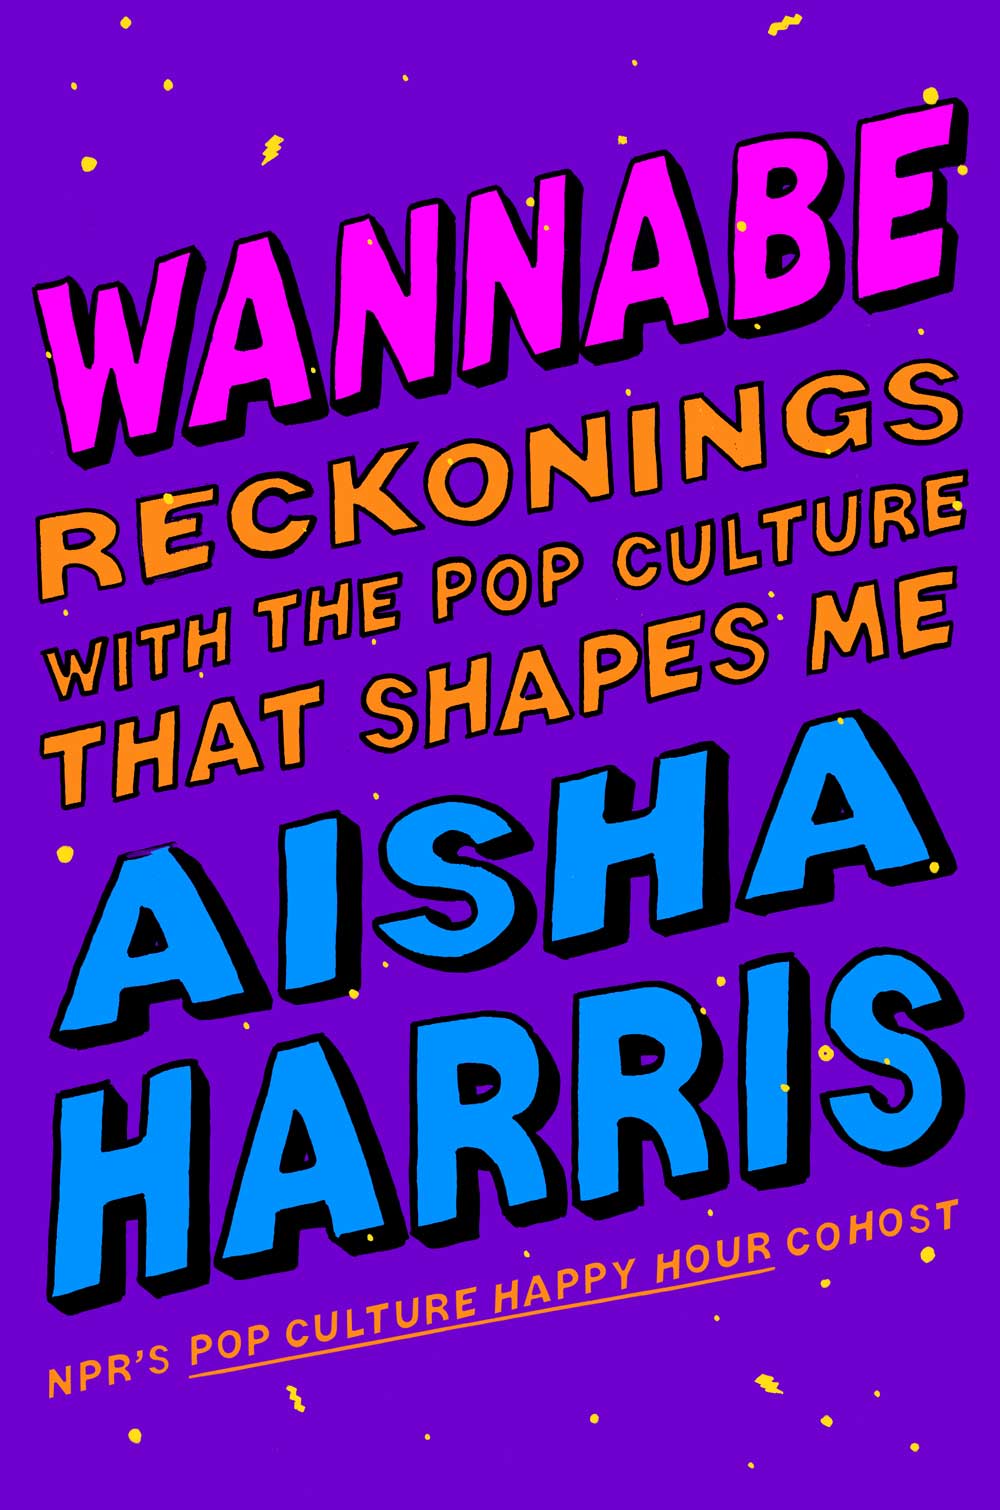 Book cover of Wannabe: Reckonings with the pop culture that shapes me. Book title in bright pink and orange colours on purple background.